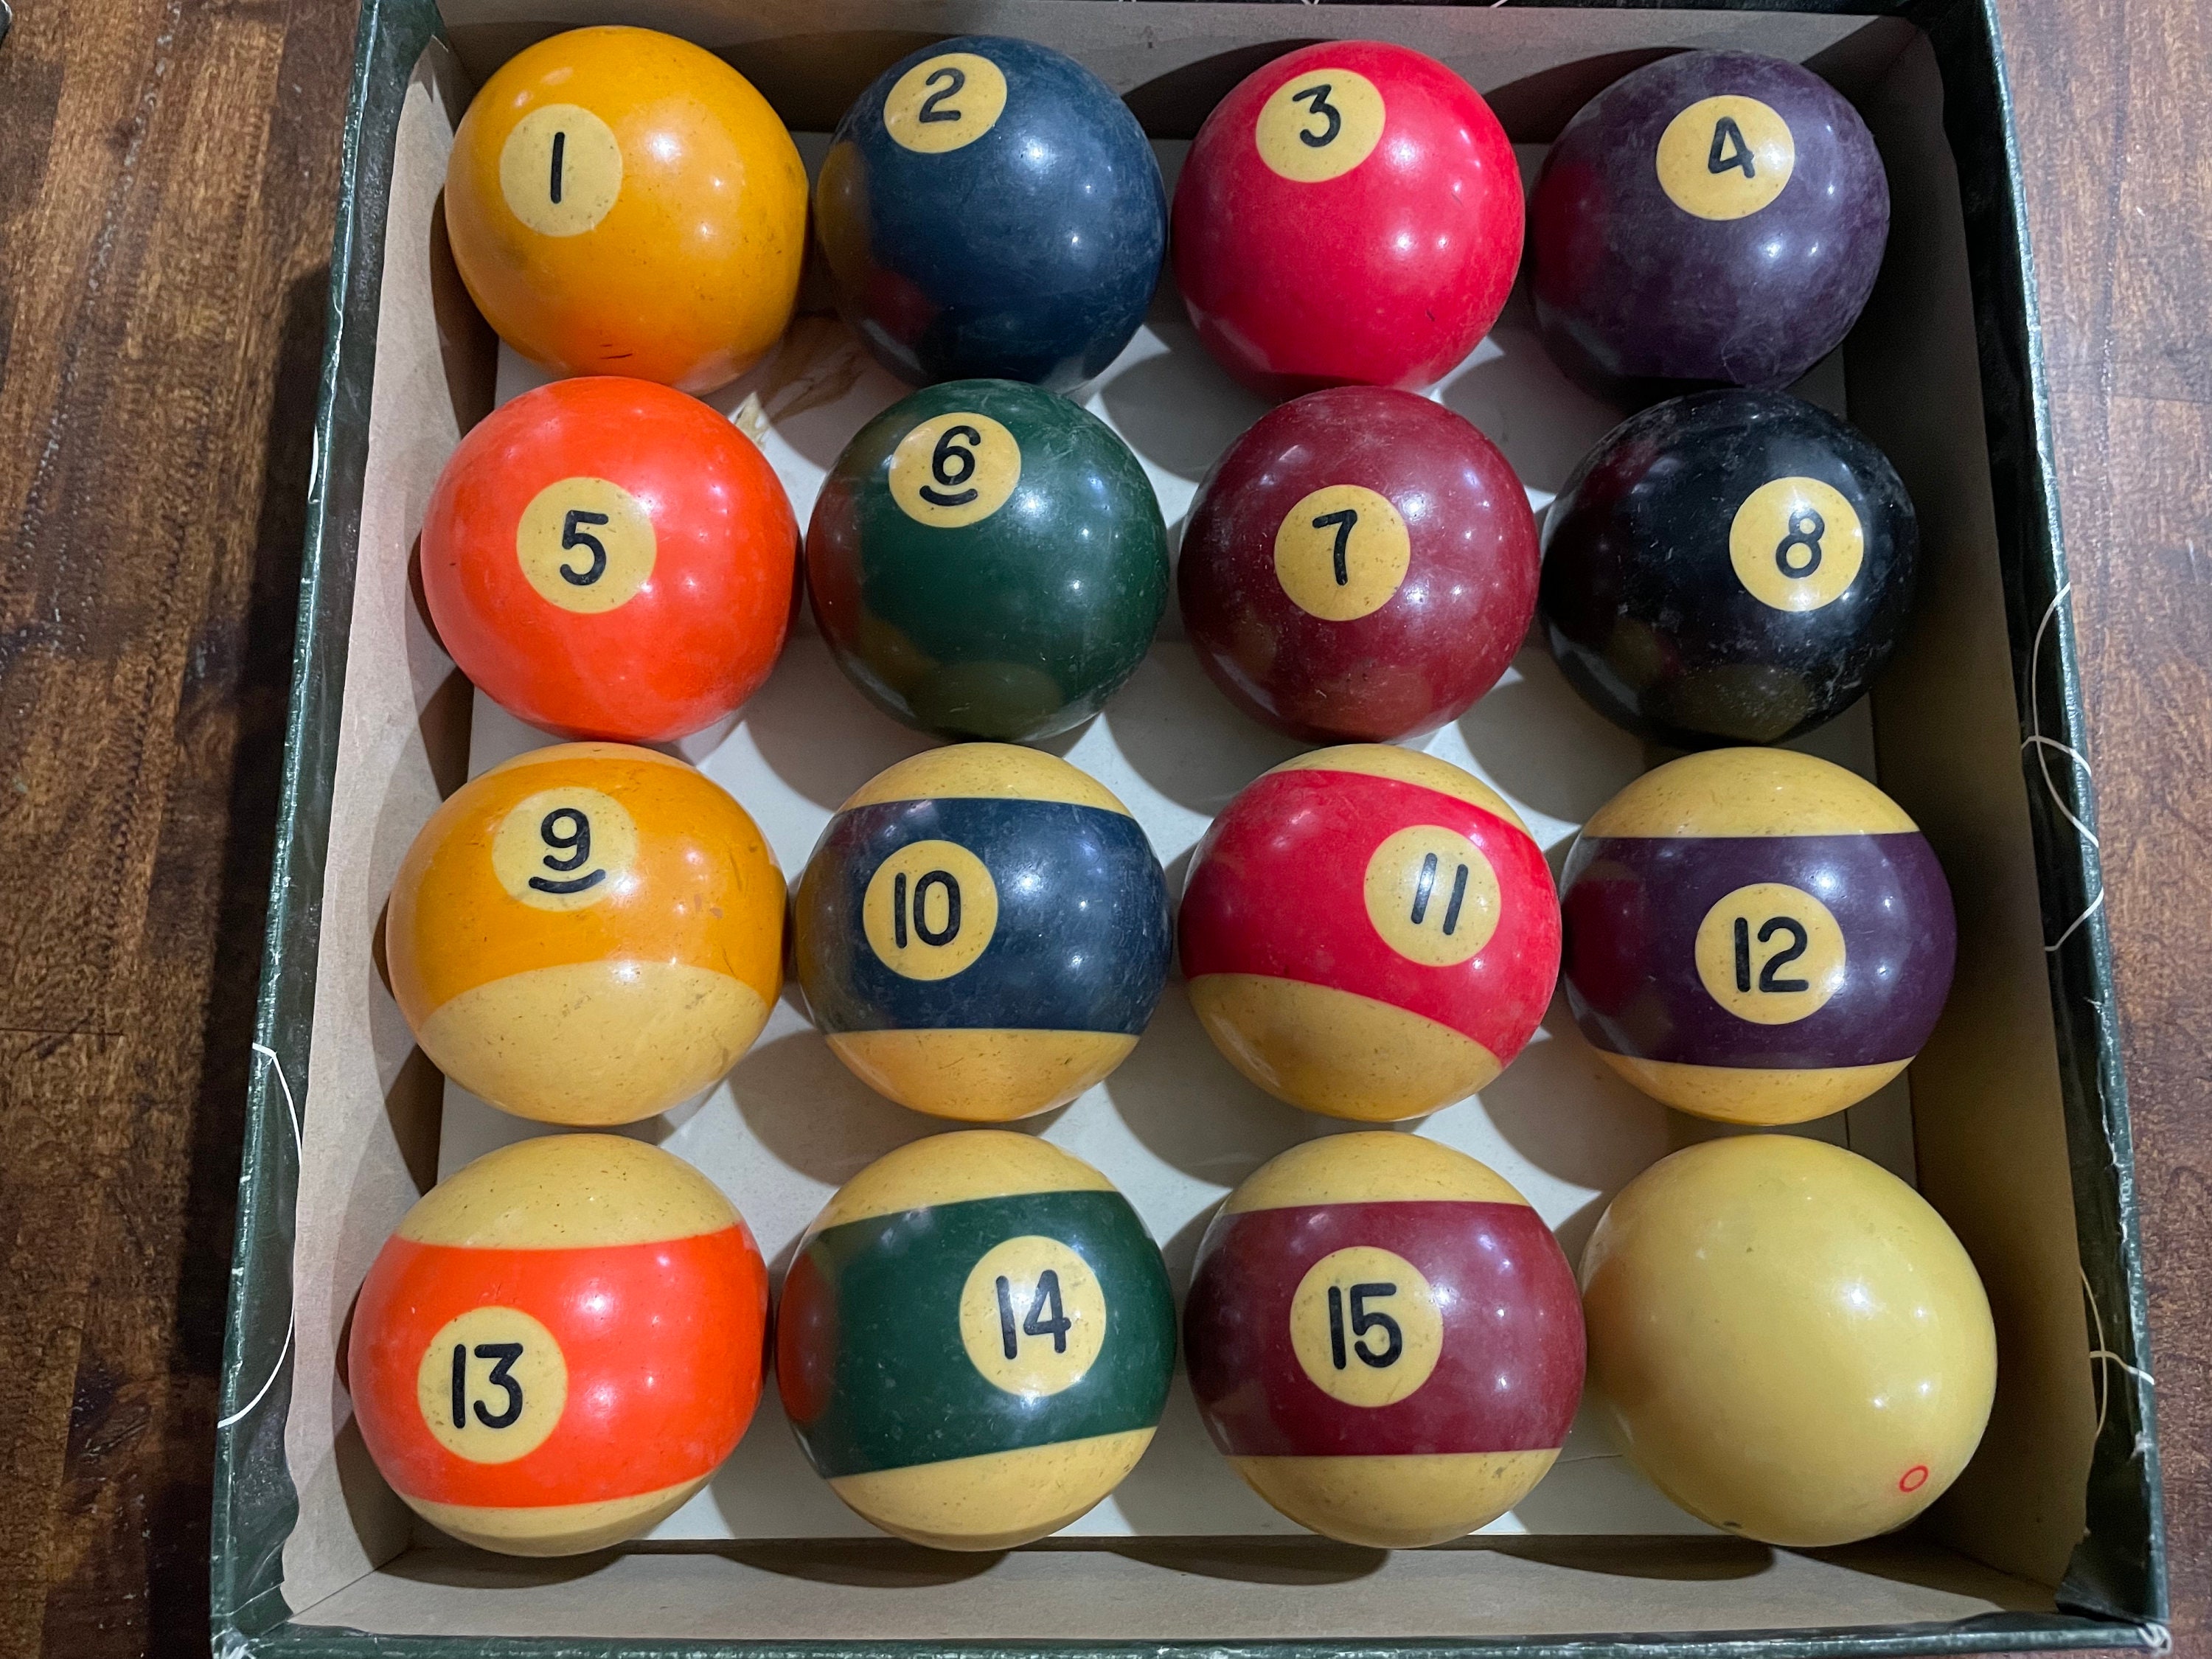 8 Pool Ball FROM $10 SHIPPED,1500 VINTAGE, ANTIQUE BILLIARD BALLS Clay,  Aramith